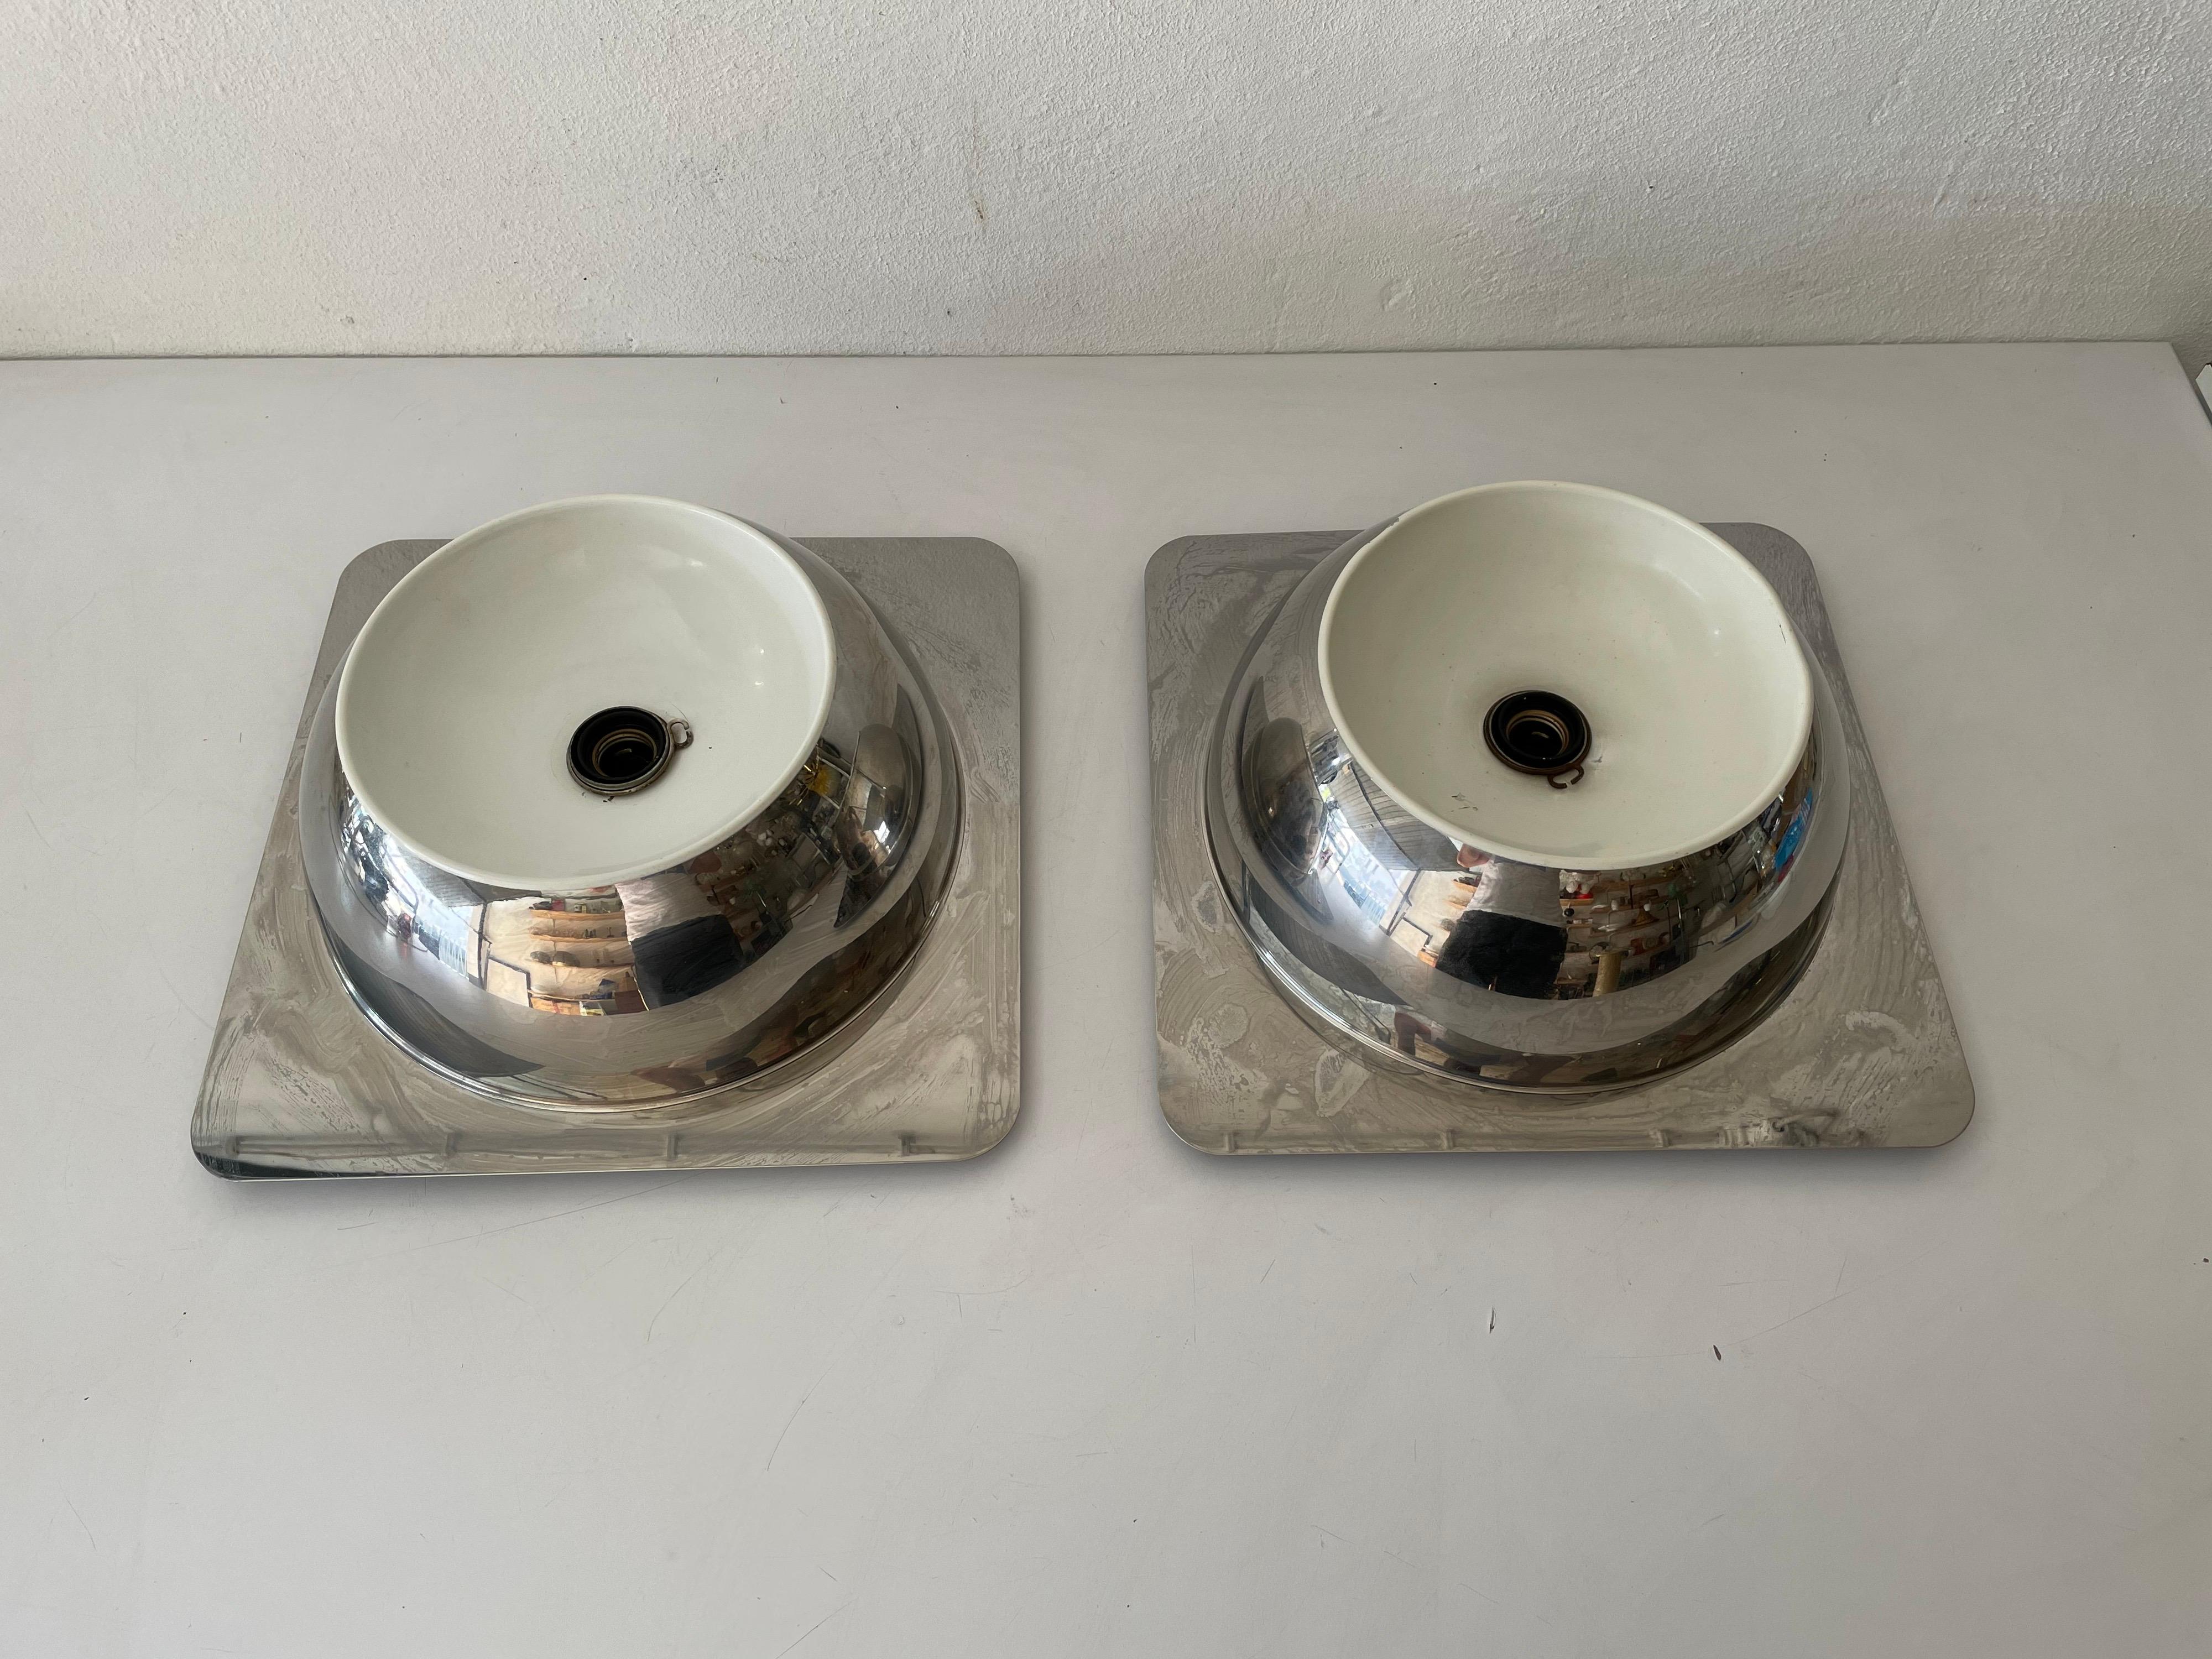 Rare Space Age pair of chrome sconces or ceiling lamps by Reggiani, 1970s, Italy

Very elegant and Minimalist wall lights

Lamps are in very good condition.

These lamps works with E27 standard light bulbs. Each lamp works with 1 light bulb.